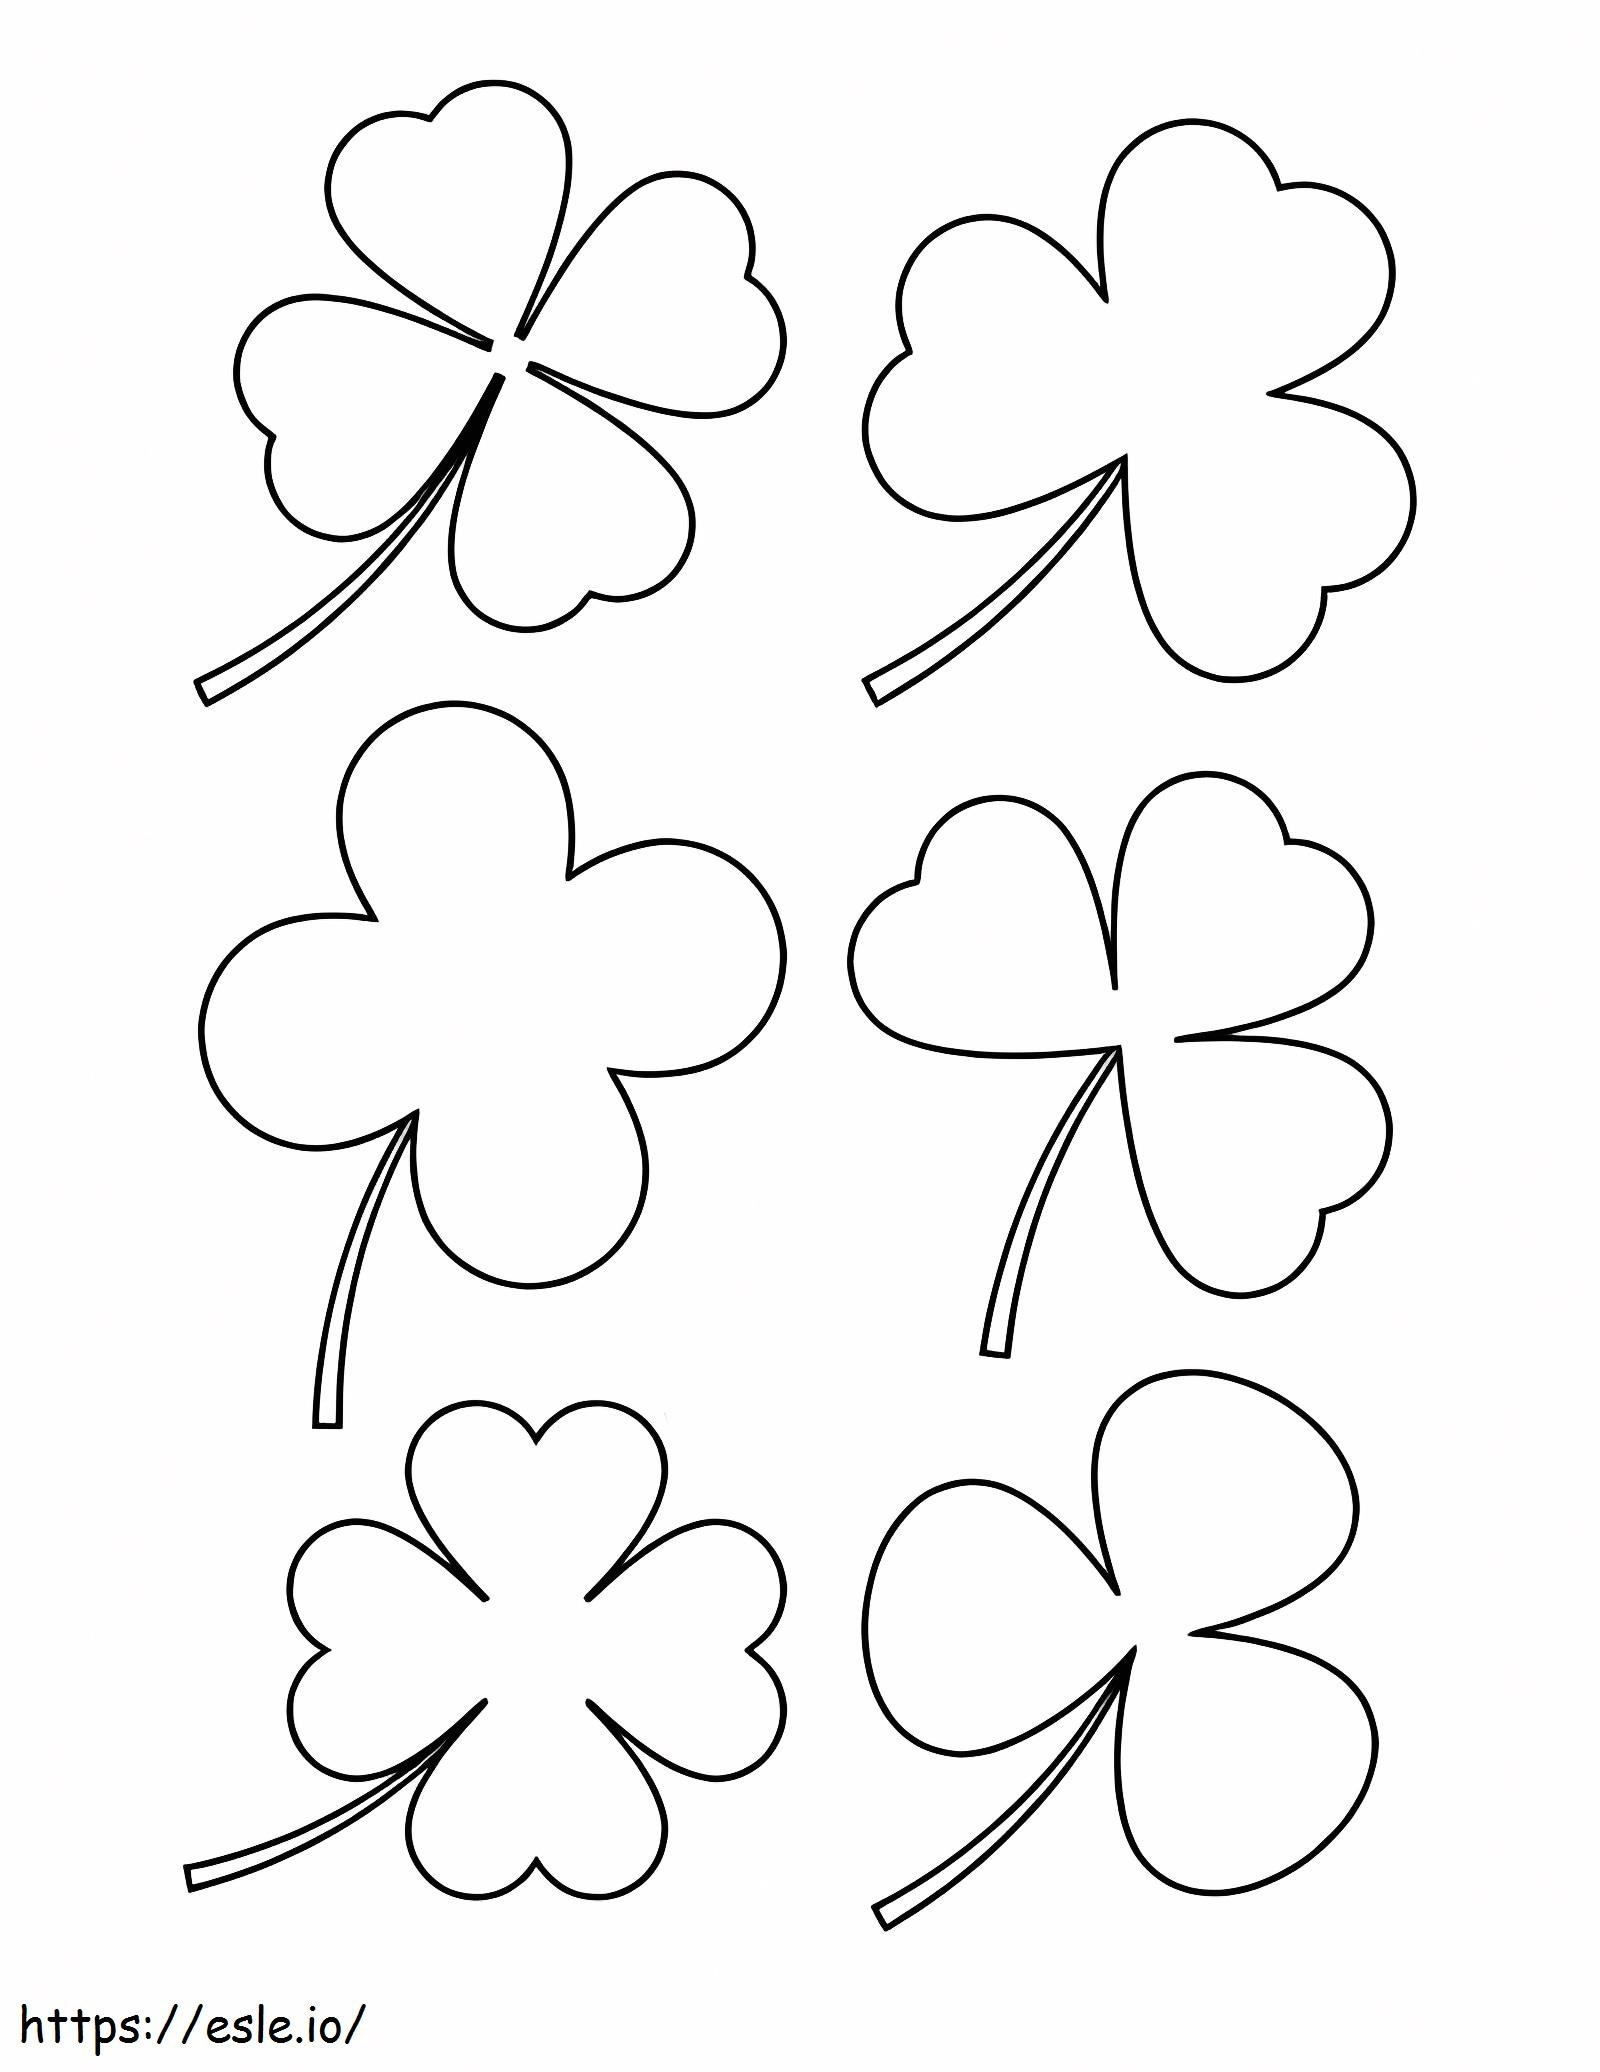 Six Clover coloring page